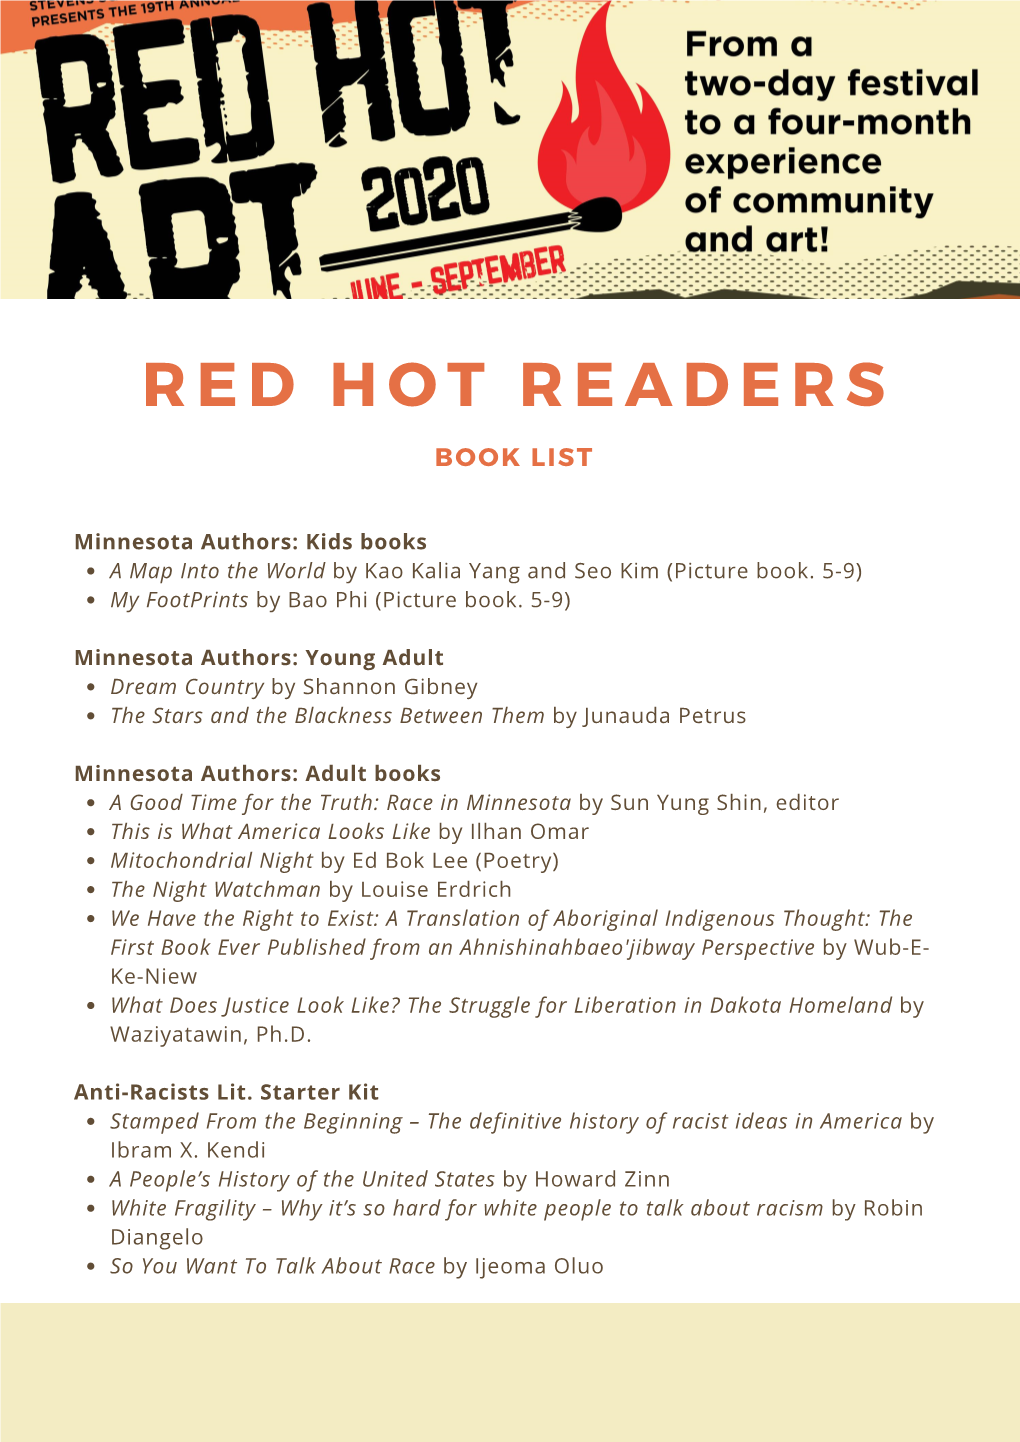 Red Hot Readers Book List